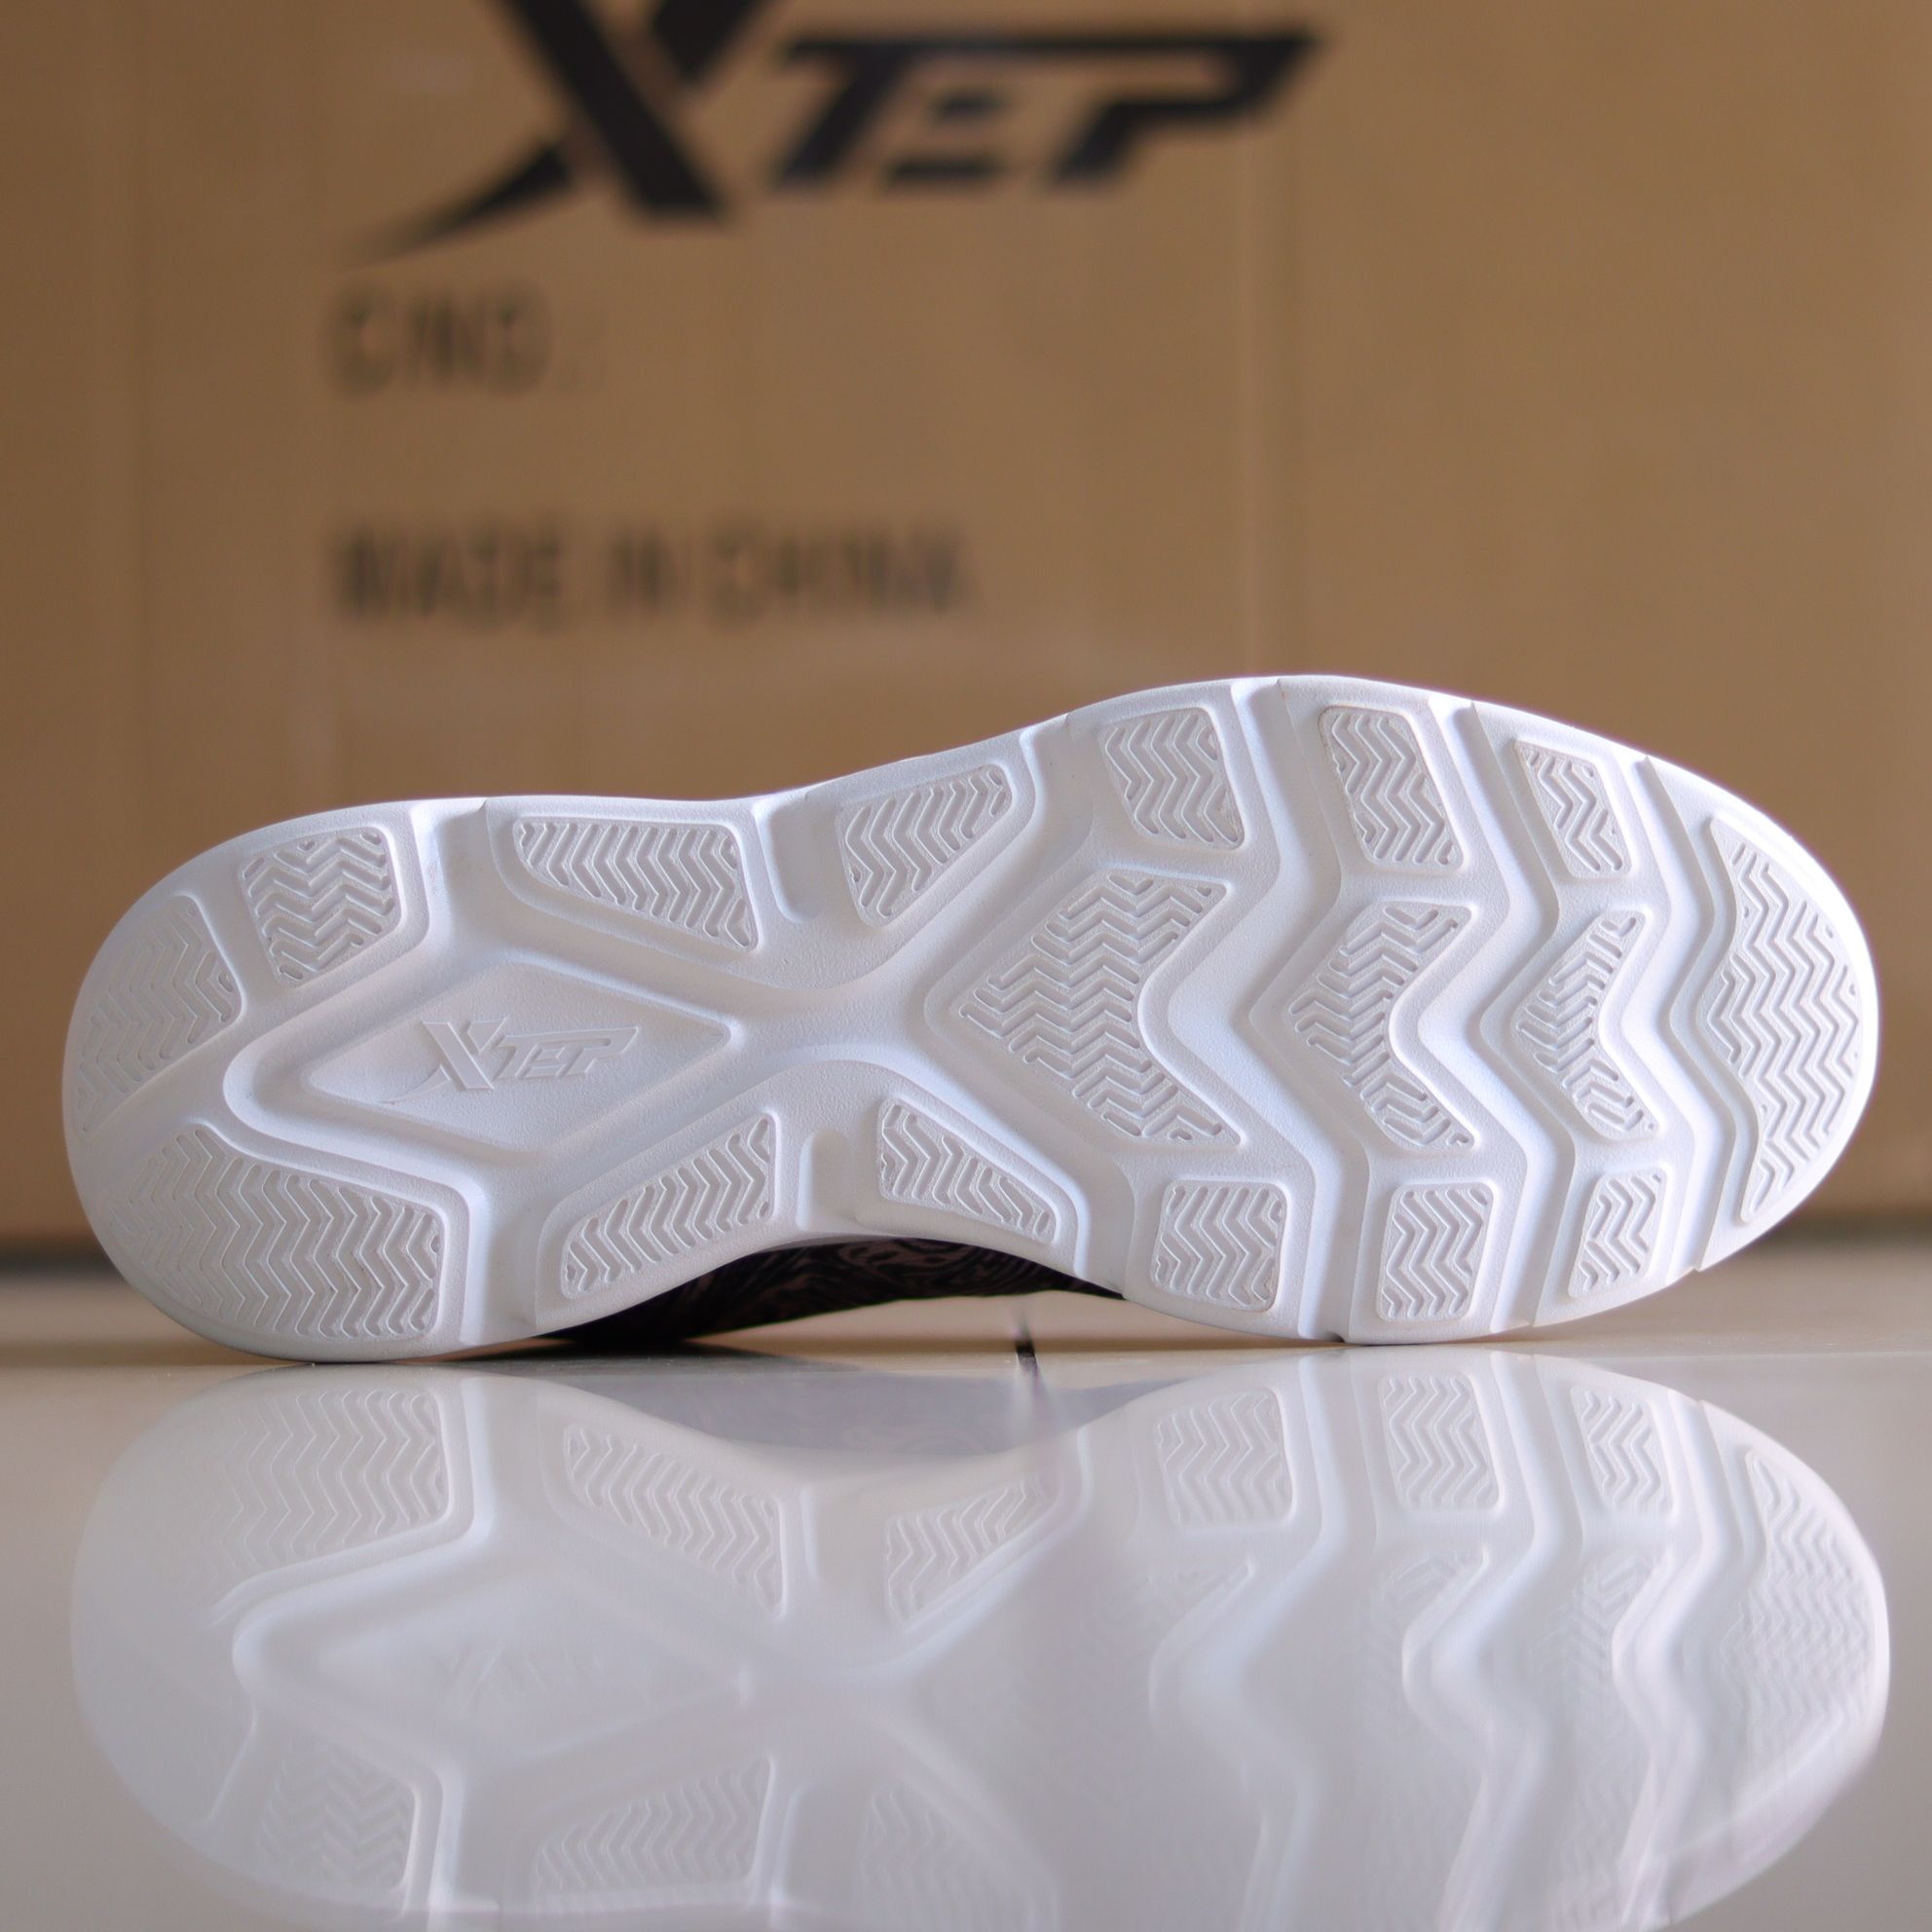 X31 - Women's Medicated Running Shoe by Xtep®